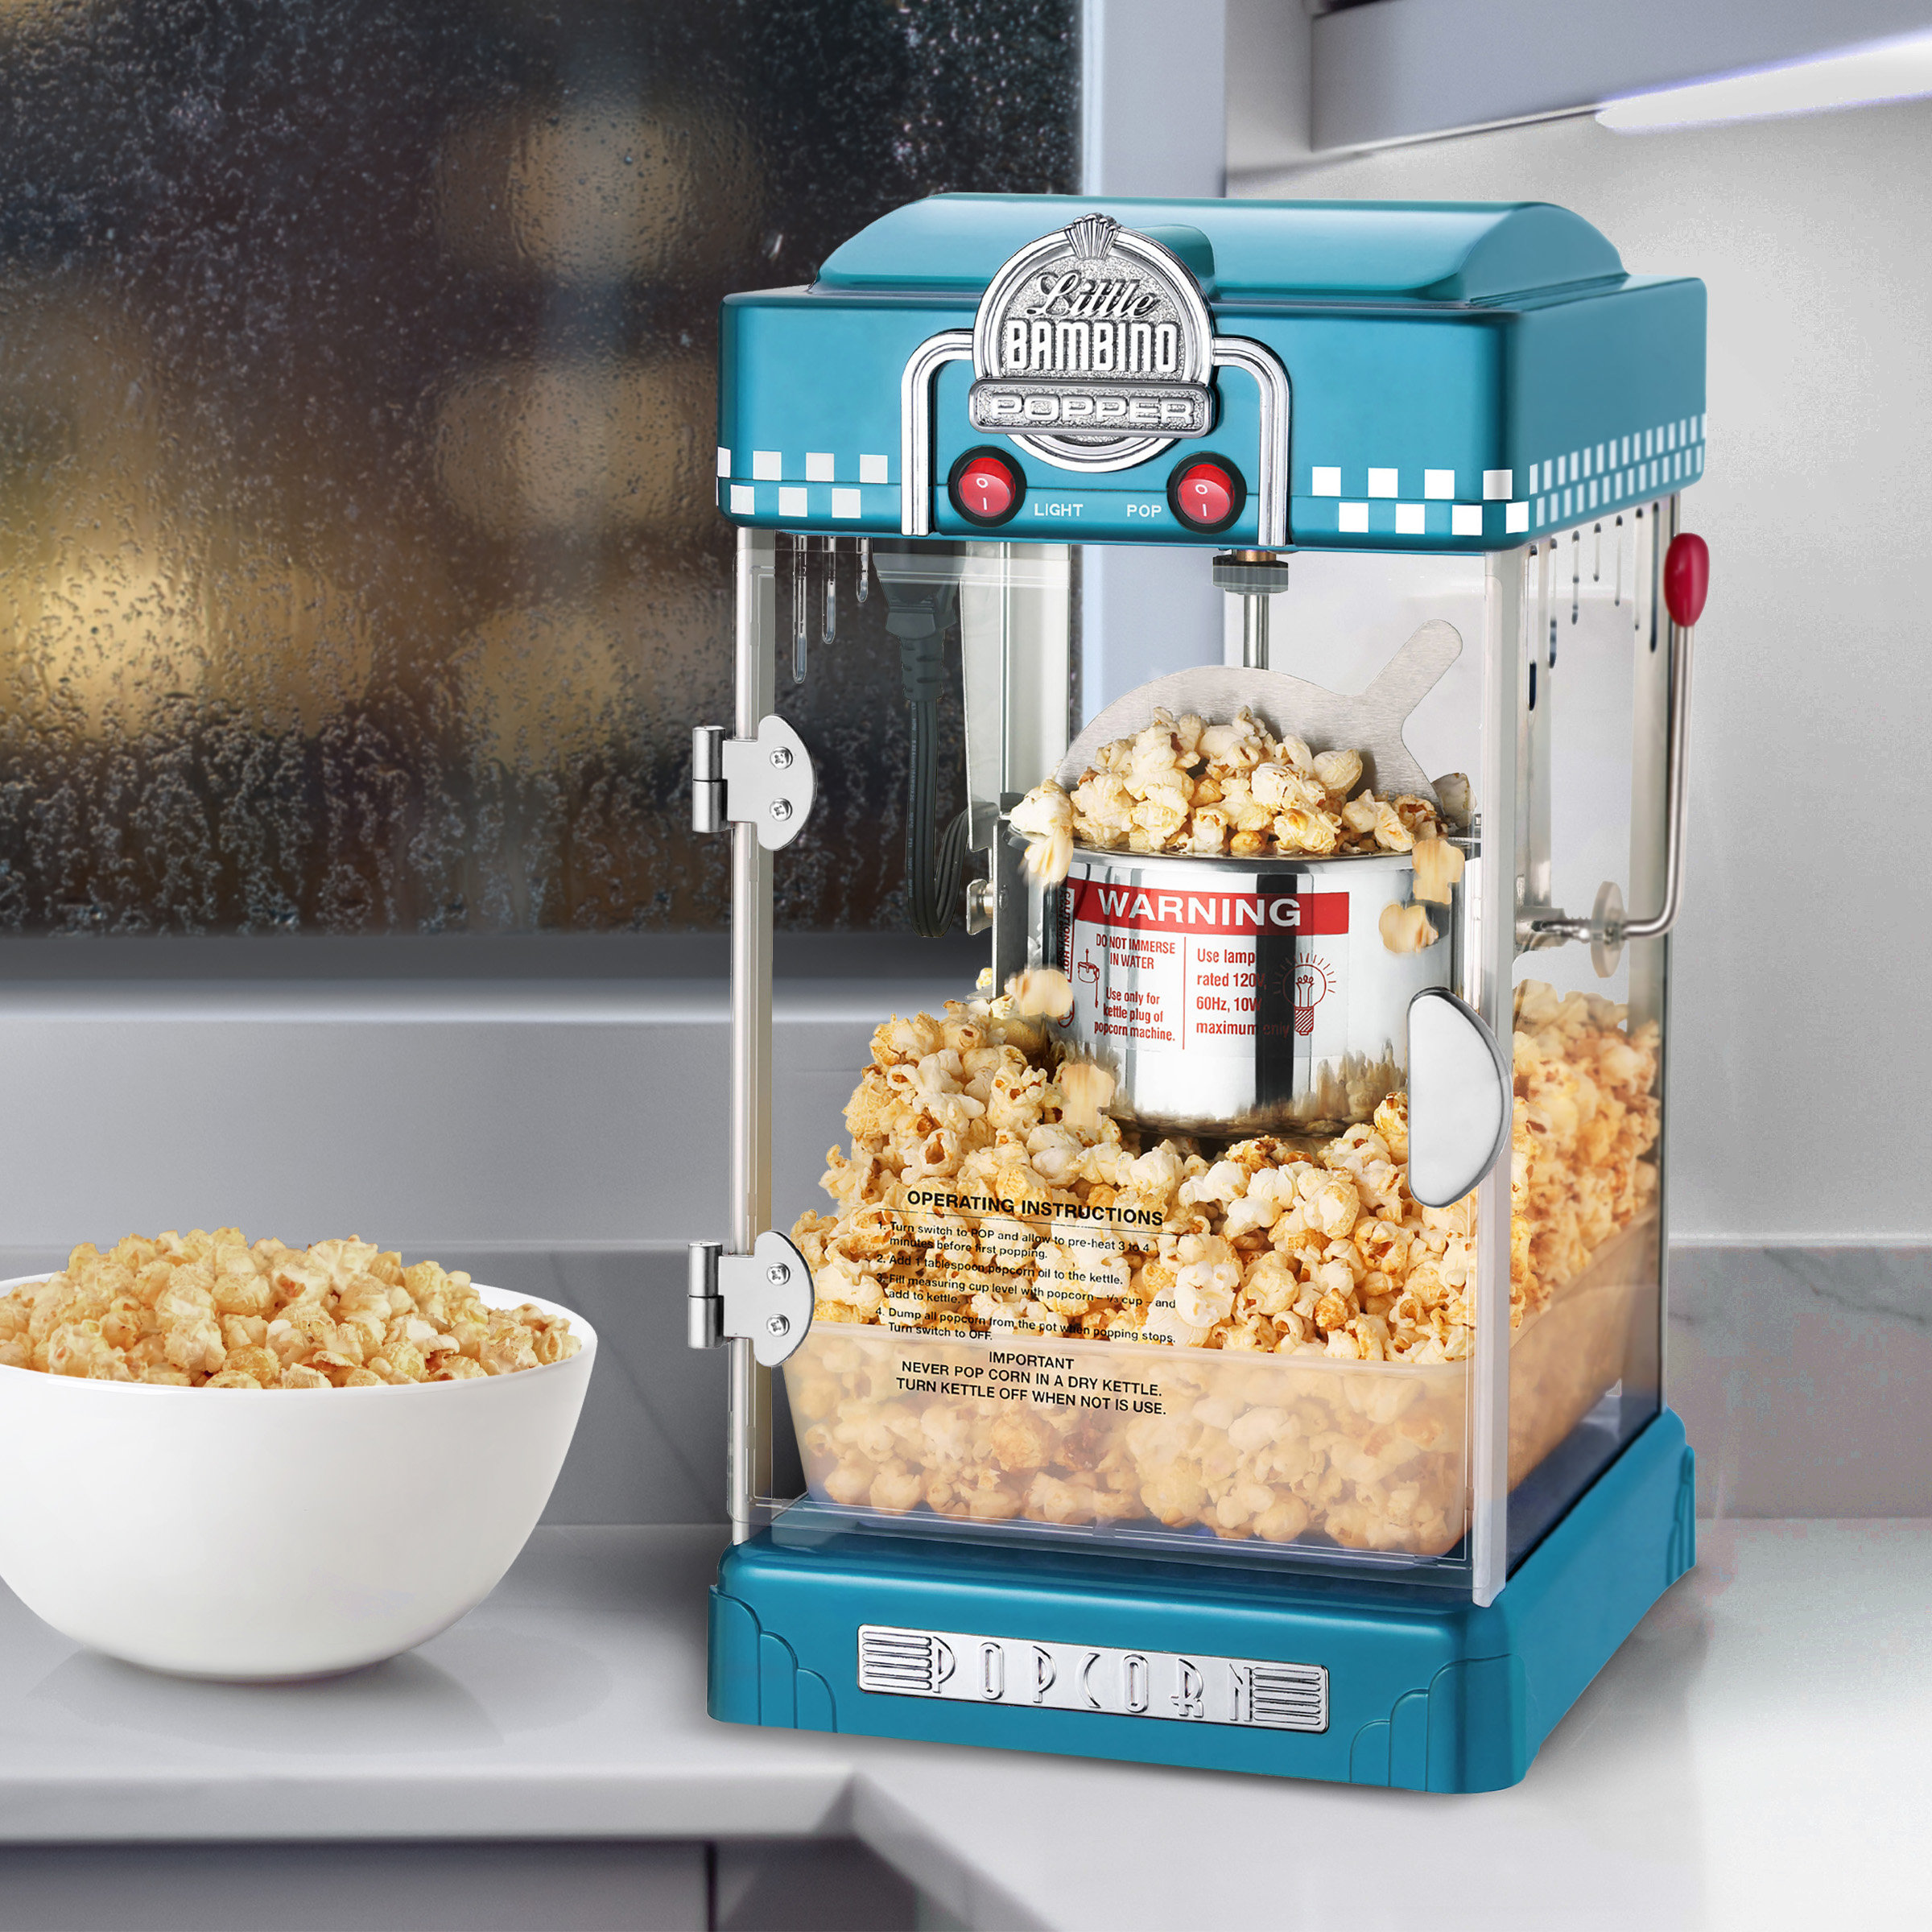 GreenLife  Now Showing Popcorn Maker